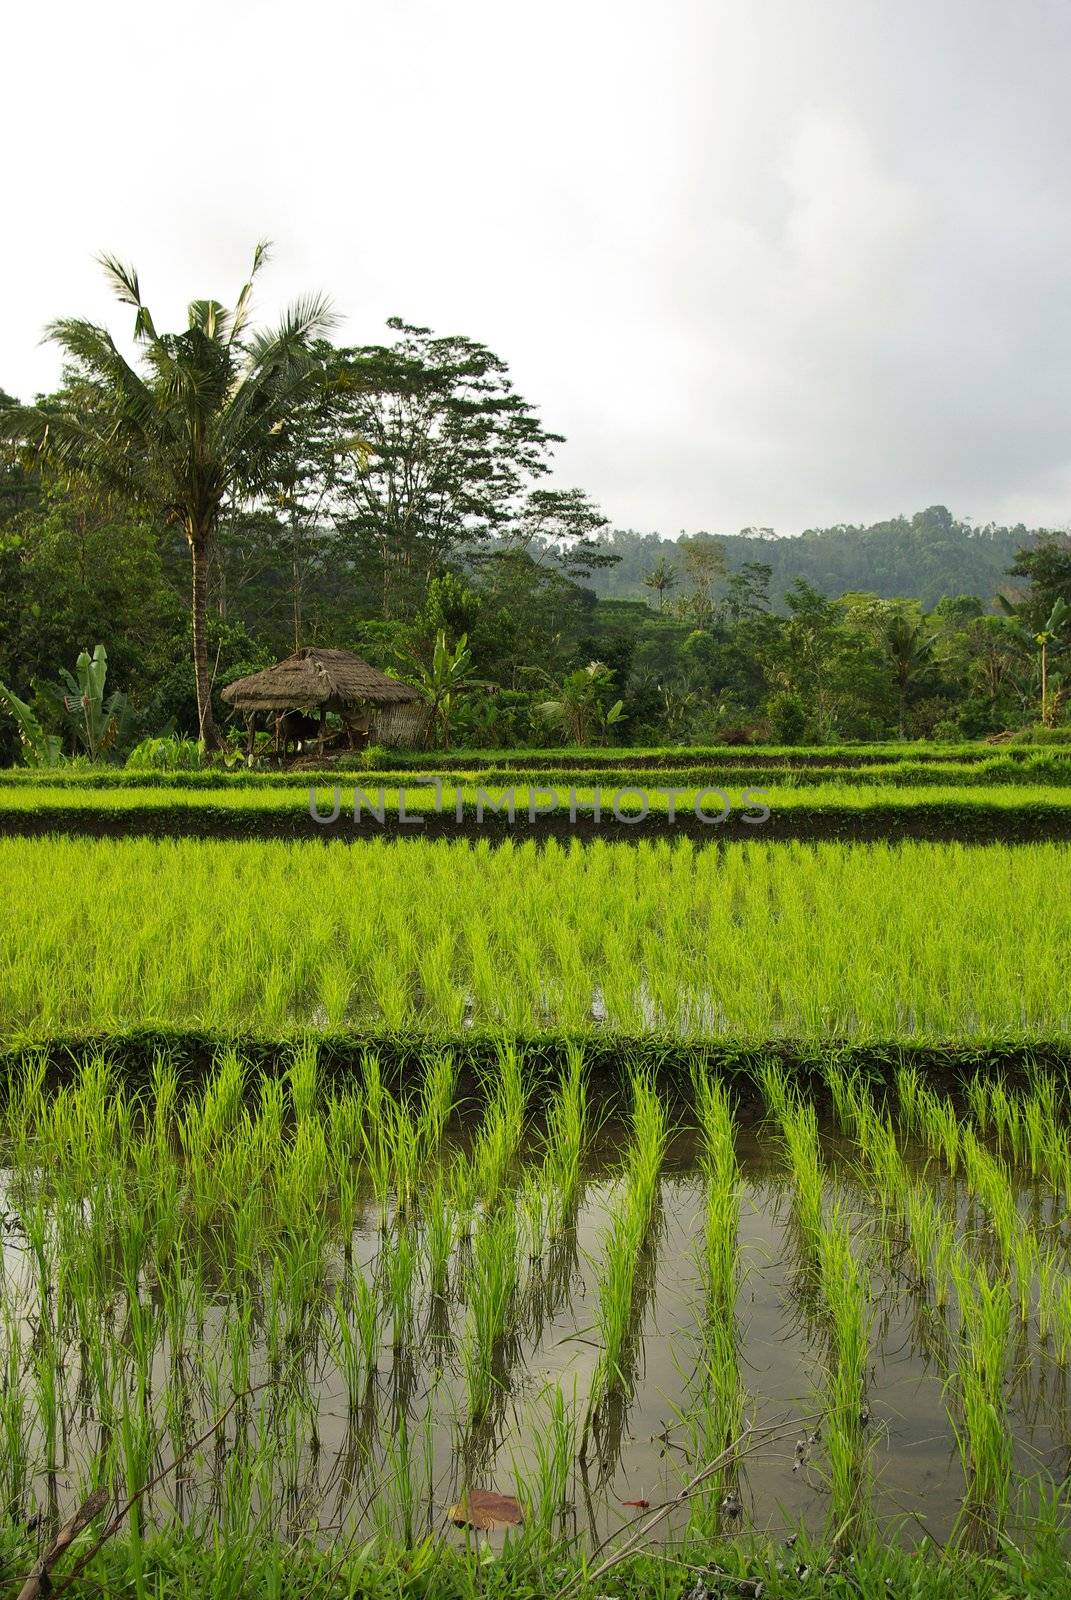 Landscape of young ricefields in Bali by shkyo30